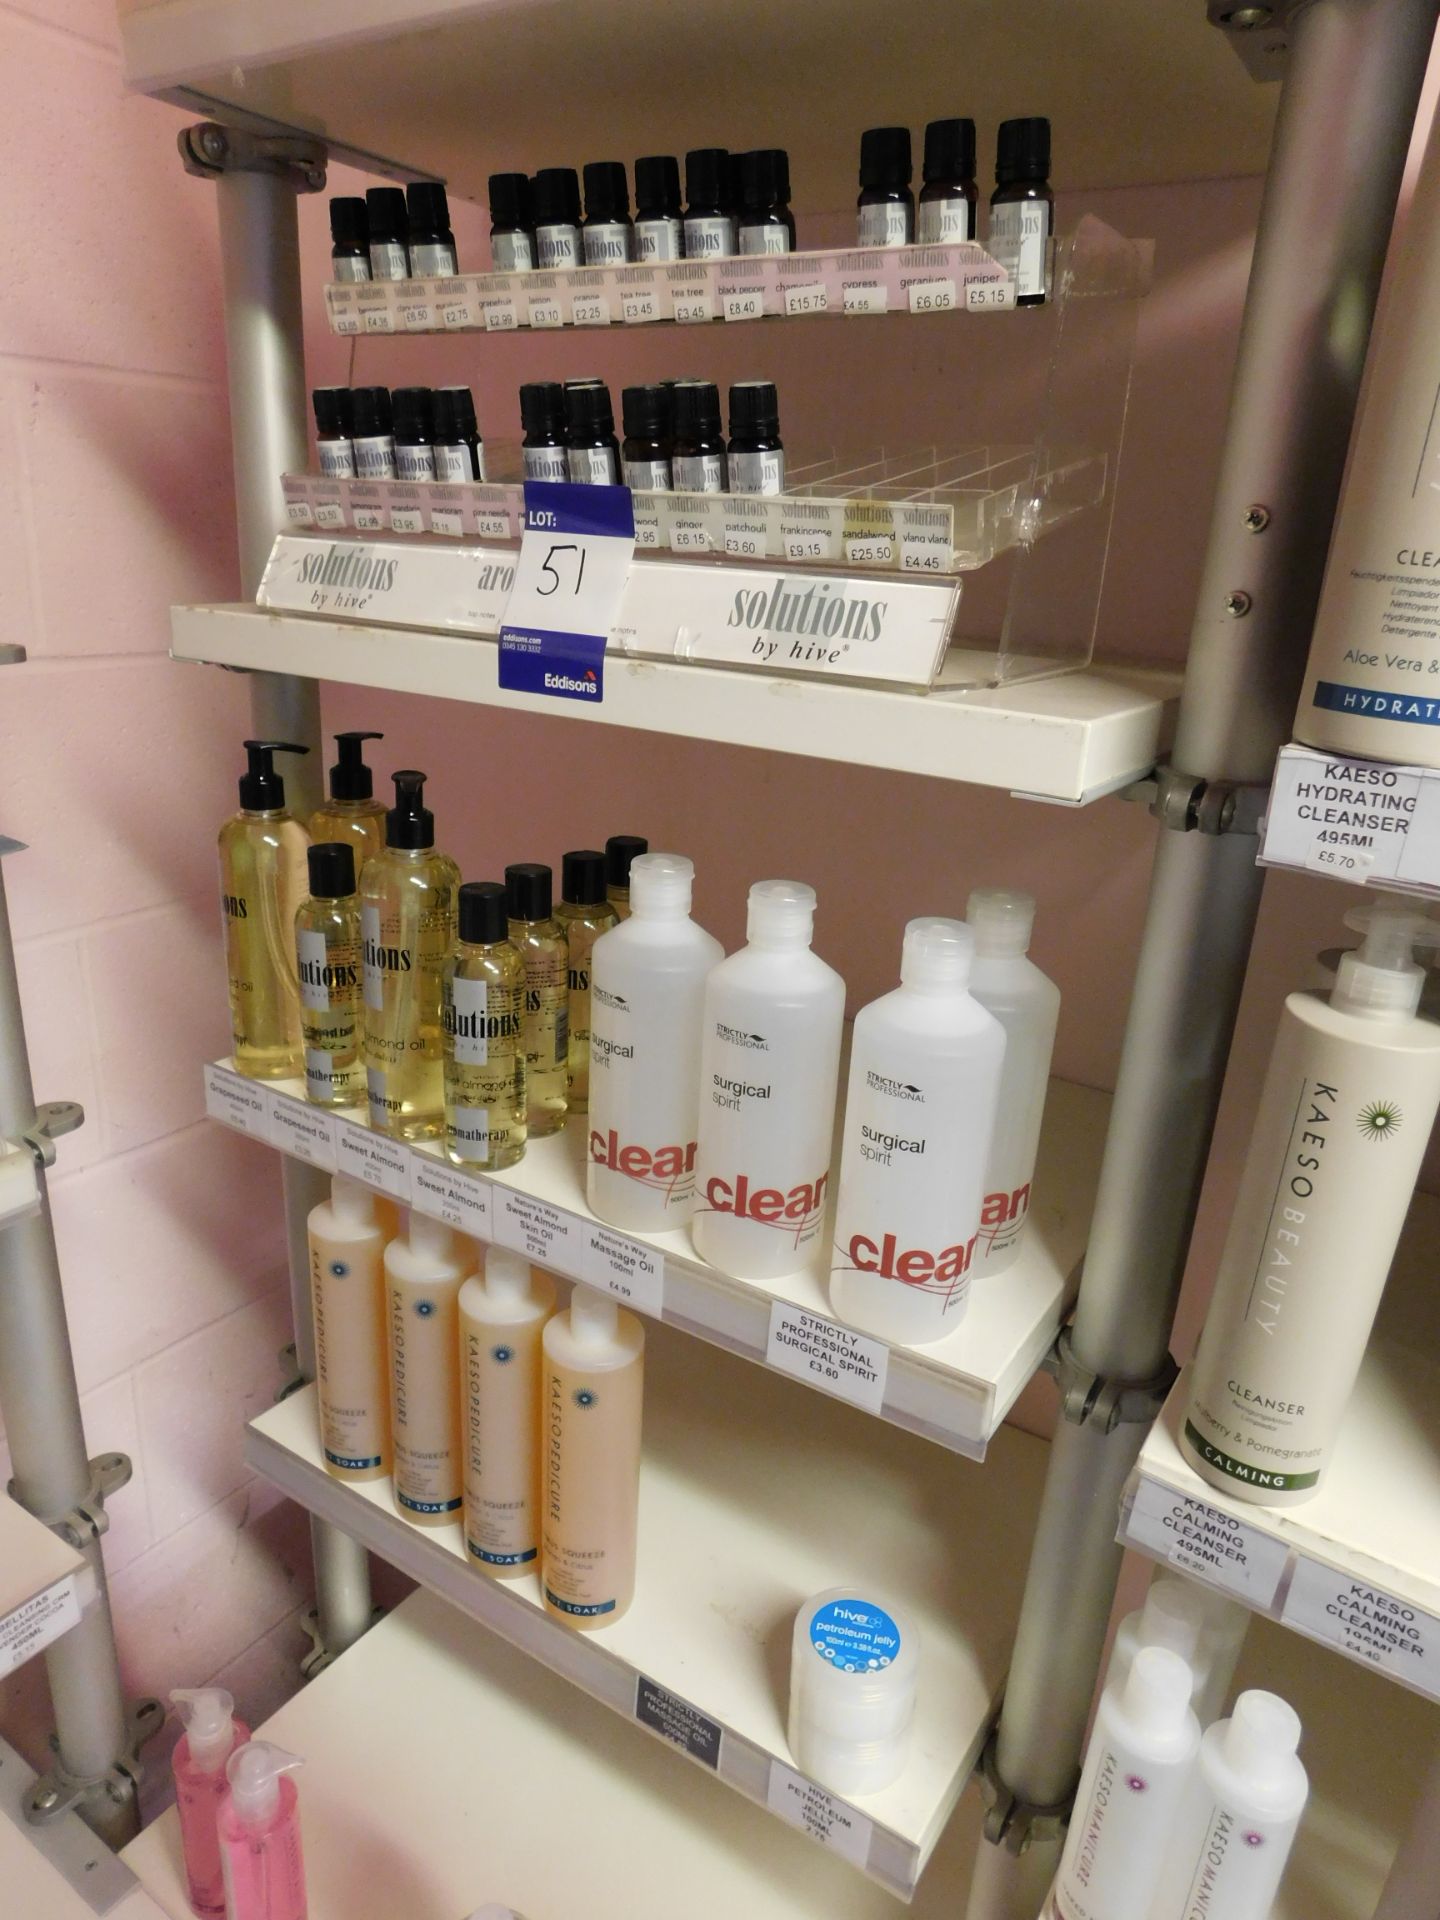 Assortment of beauty treatment products to shelving, including toner, hand treatment cream, - Image 4 of 4